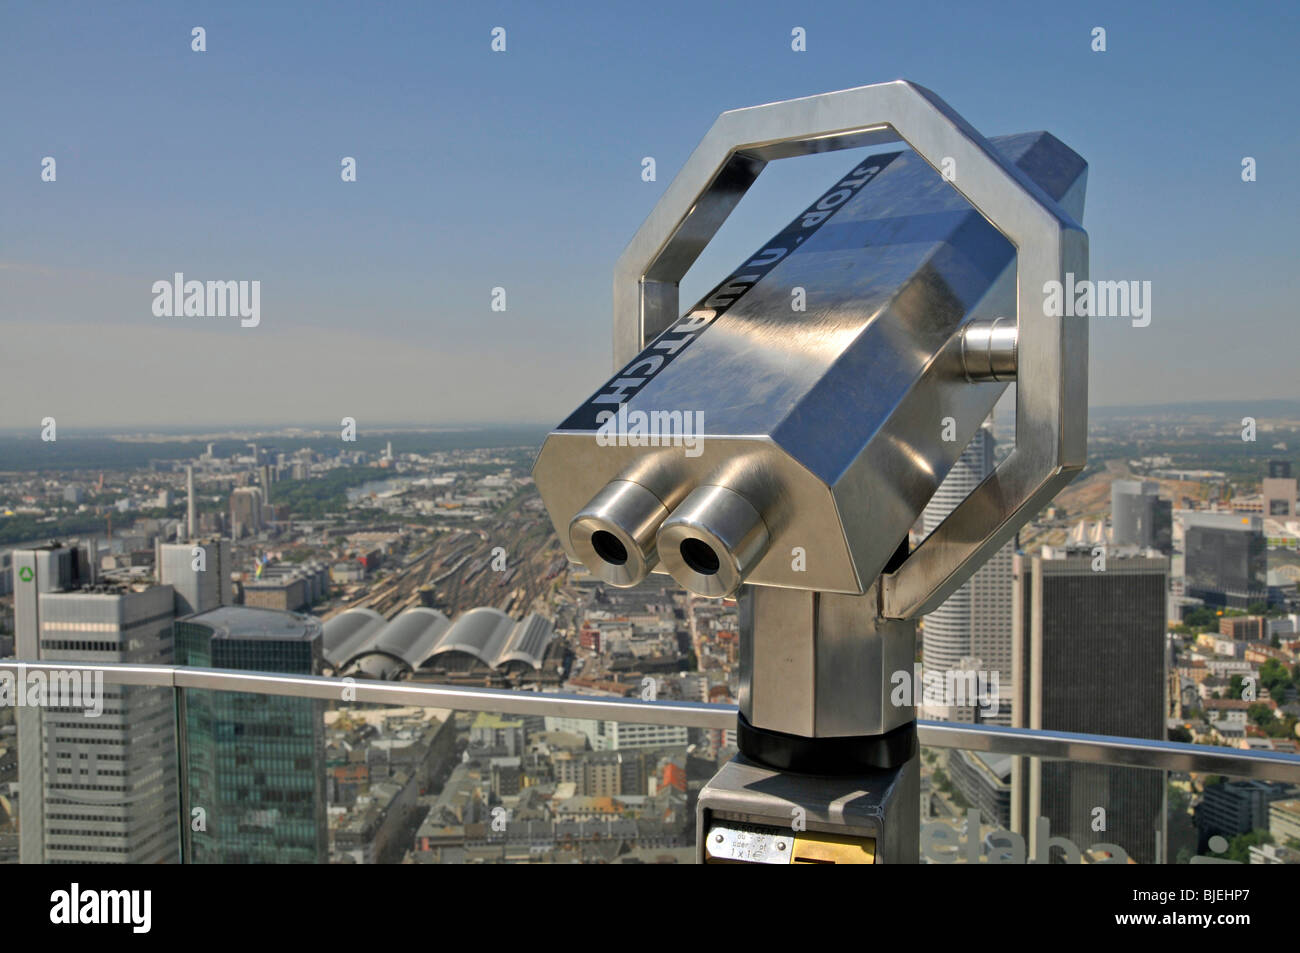 View of the inner city, Day Telescope on a viewing platform in the foreground, Frankfurt am Main, Germany Stock Photo